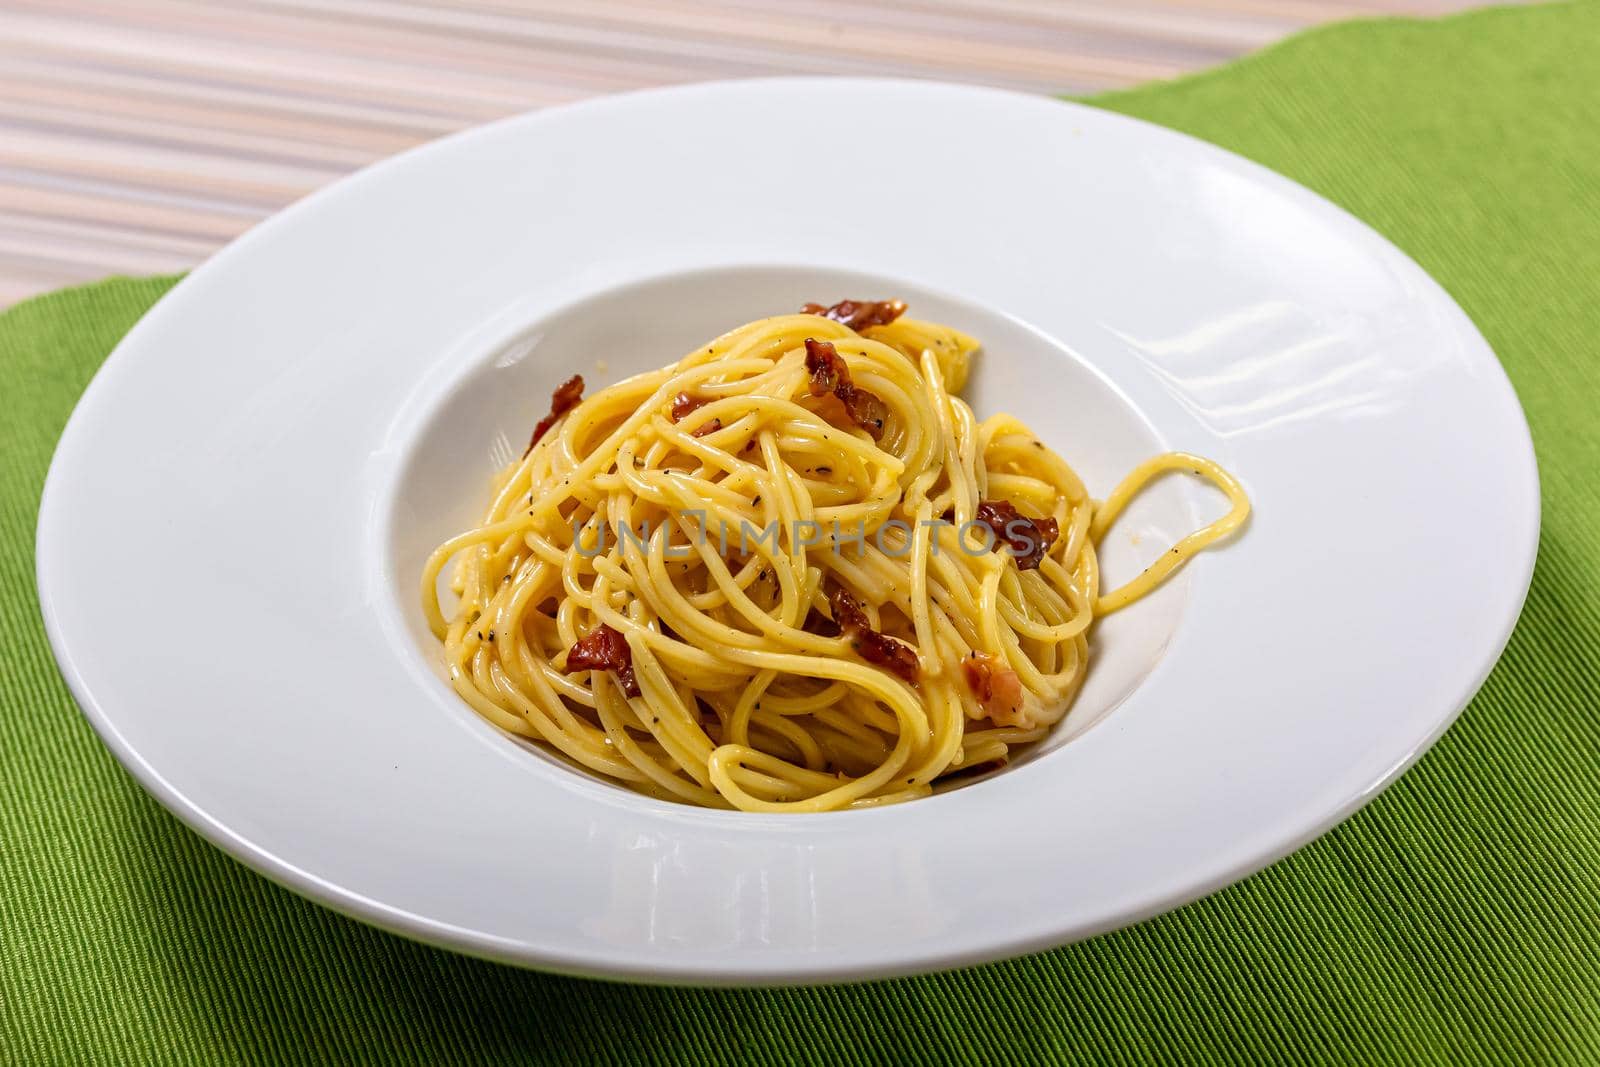 Italian delicious spaghetti carbonara pasta with bacon parmesan cheese garlic creamy sauce lies in a dark wooden round plate, bottle of olive oil, spices and a sprig of green leaves, top view close-up